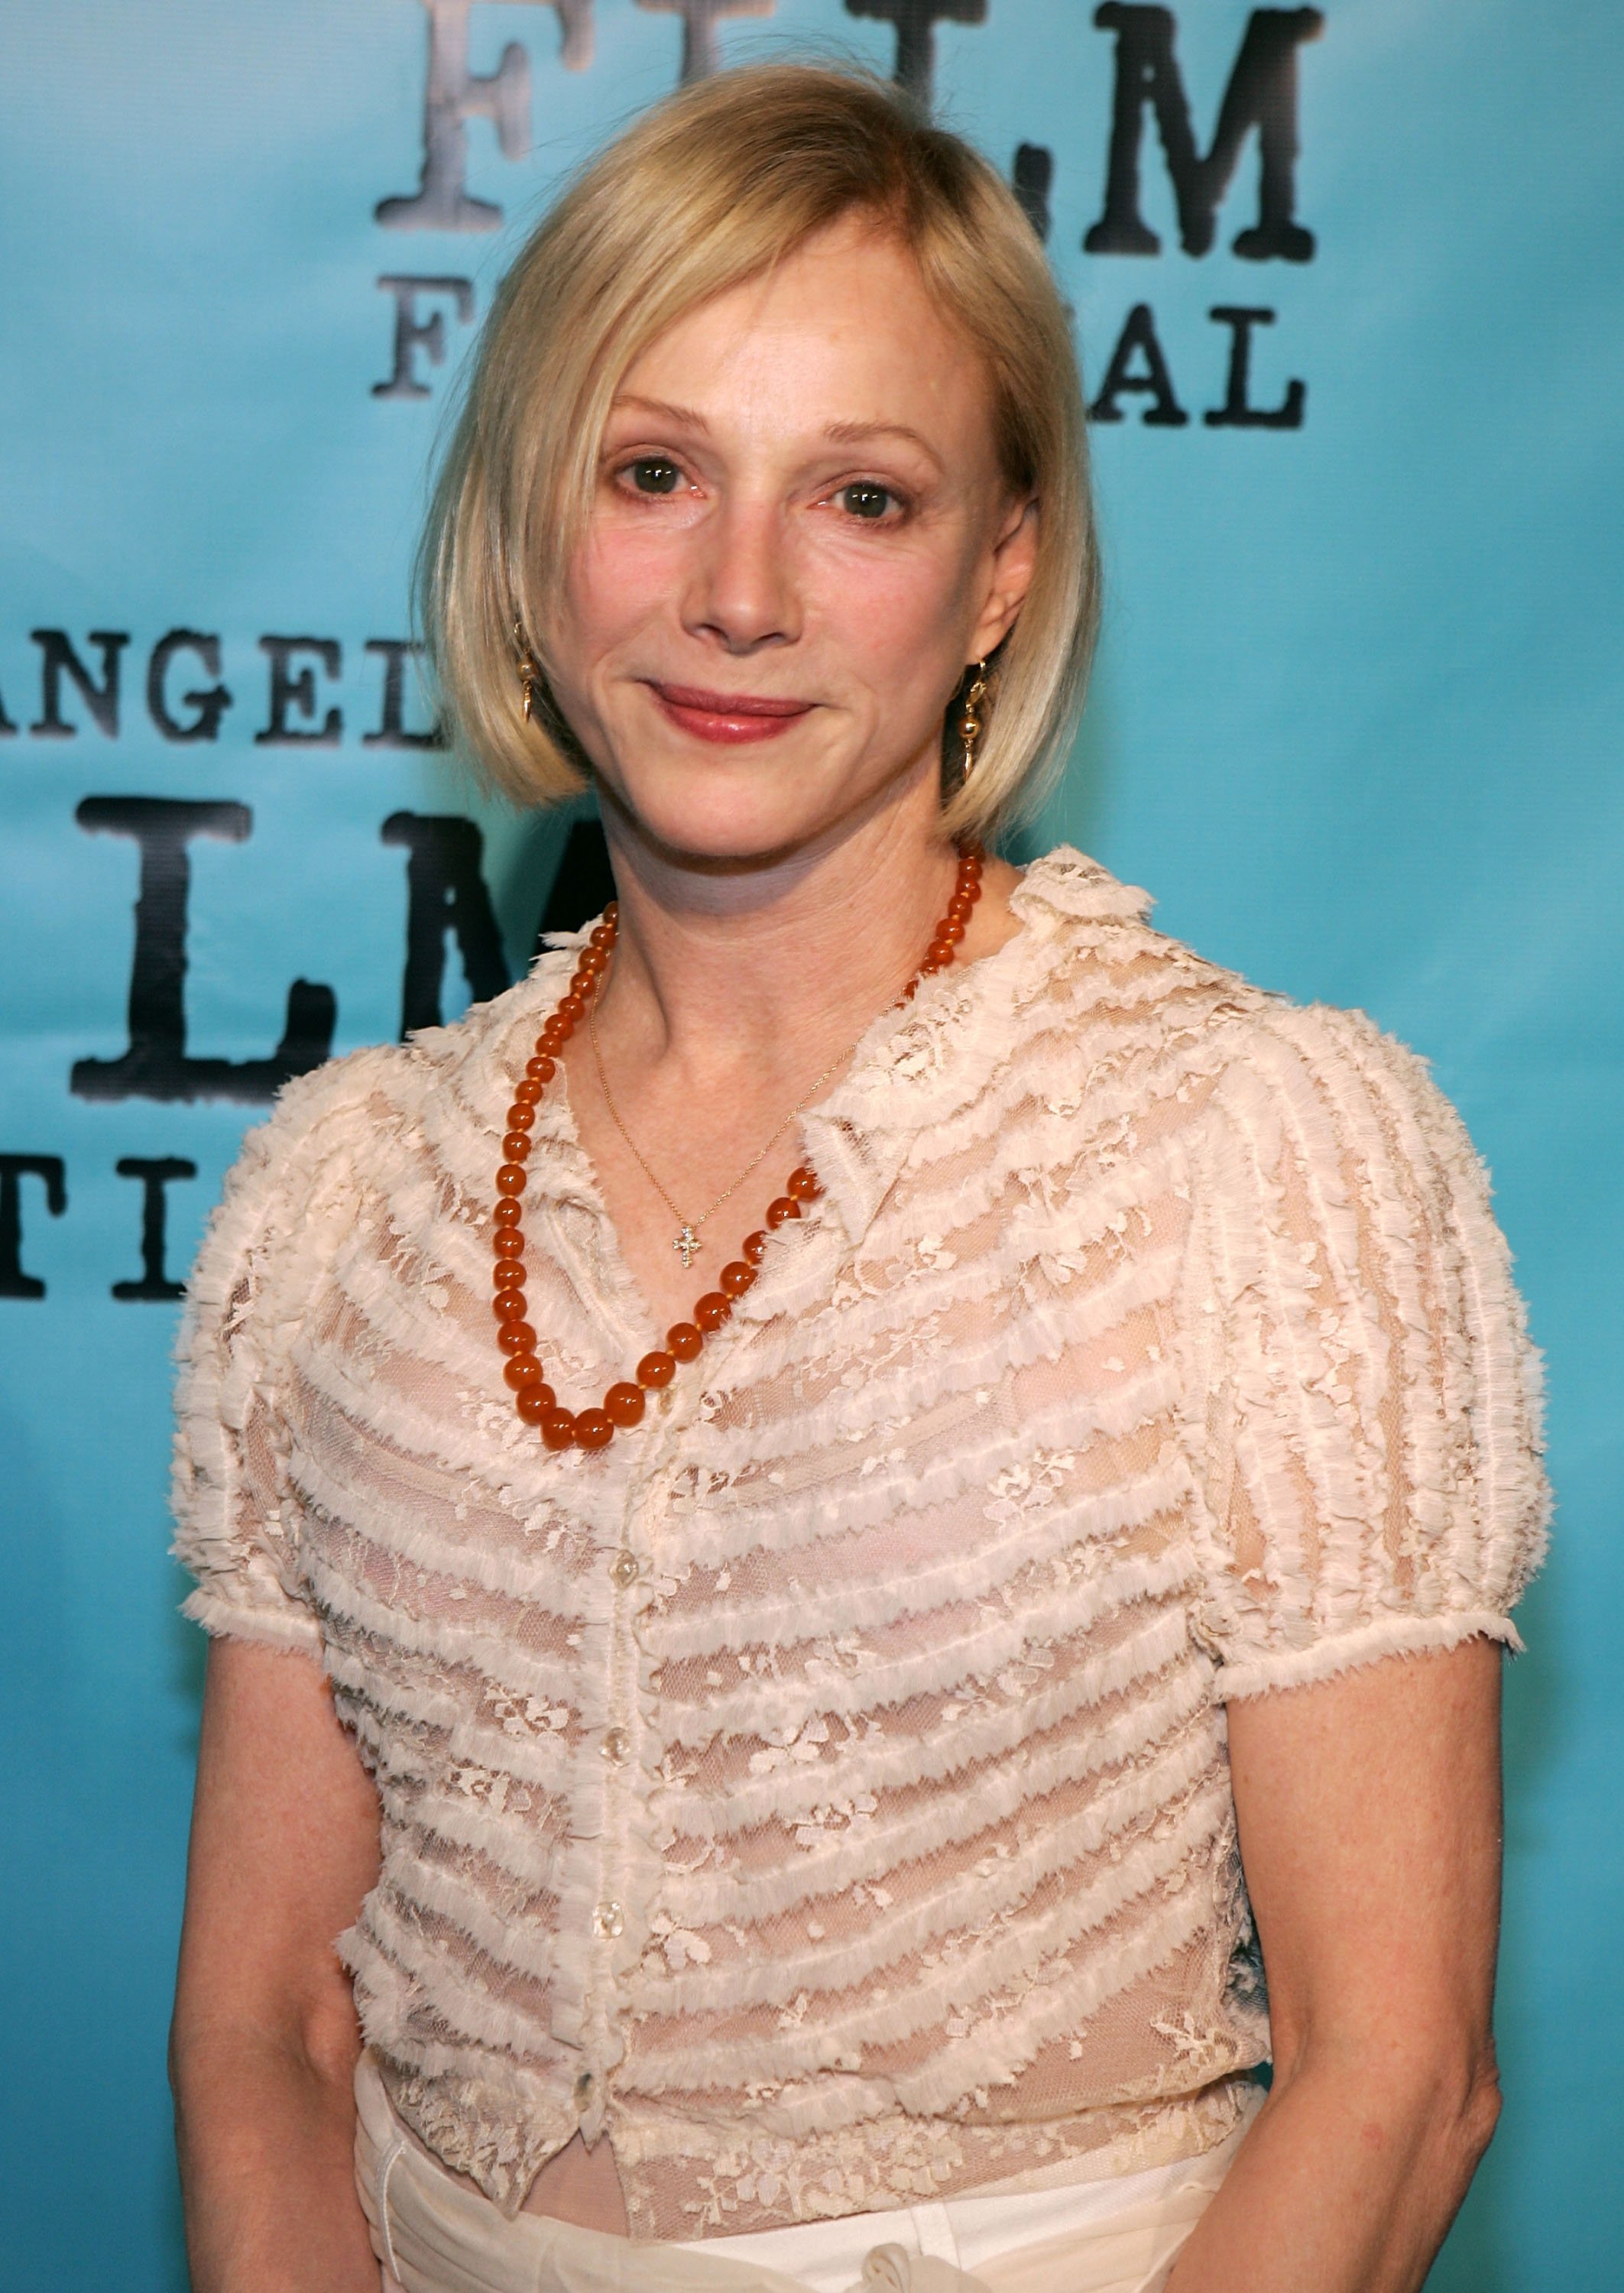 Sondra Locke arrives at the premiere of "Our Very Own" at the Los Angeles Film Festival at the Director Guild of America on June 22, 2005 in West Hollywood, California. | Source: Getty Images